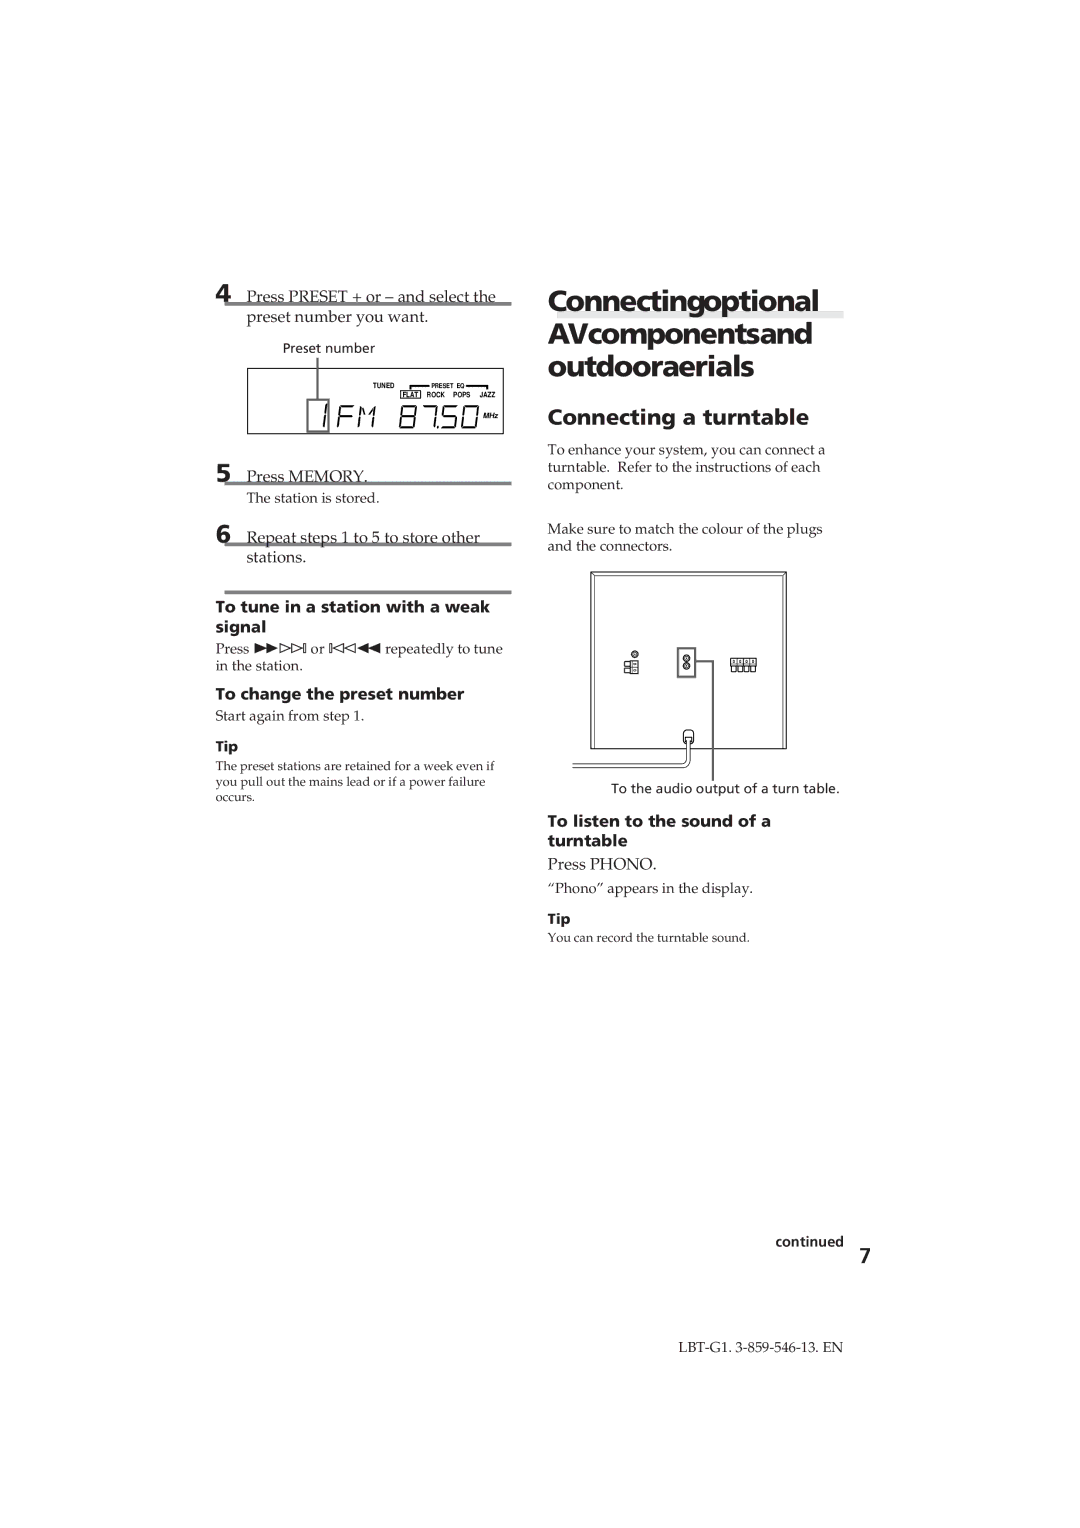 Sony LBT-G1 manual Connectingoptional AVcomponentsand outdooraerials, To tune in a station with a weak signal 